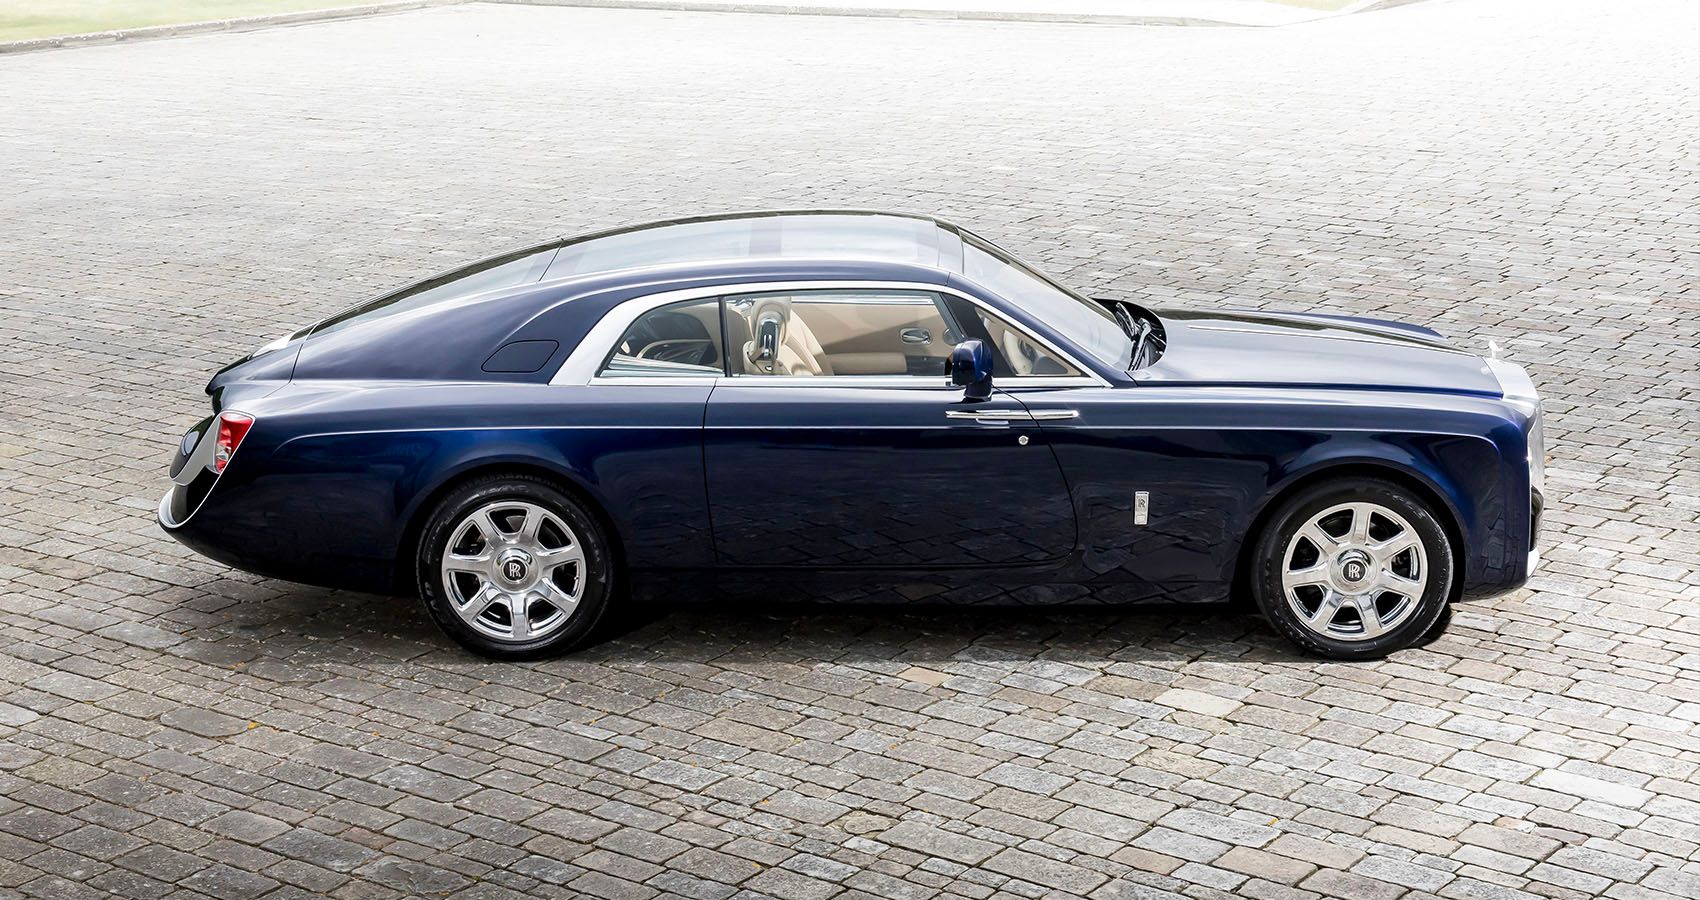 13 Million RollsRoyce Sweptail Could Be Most Expensive New Car Ever Made